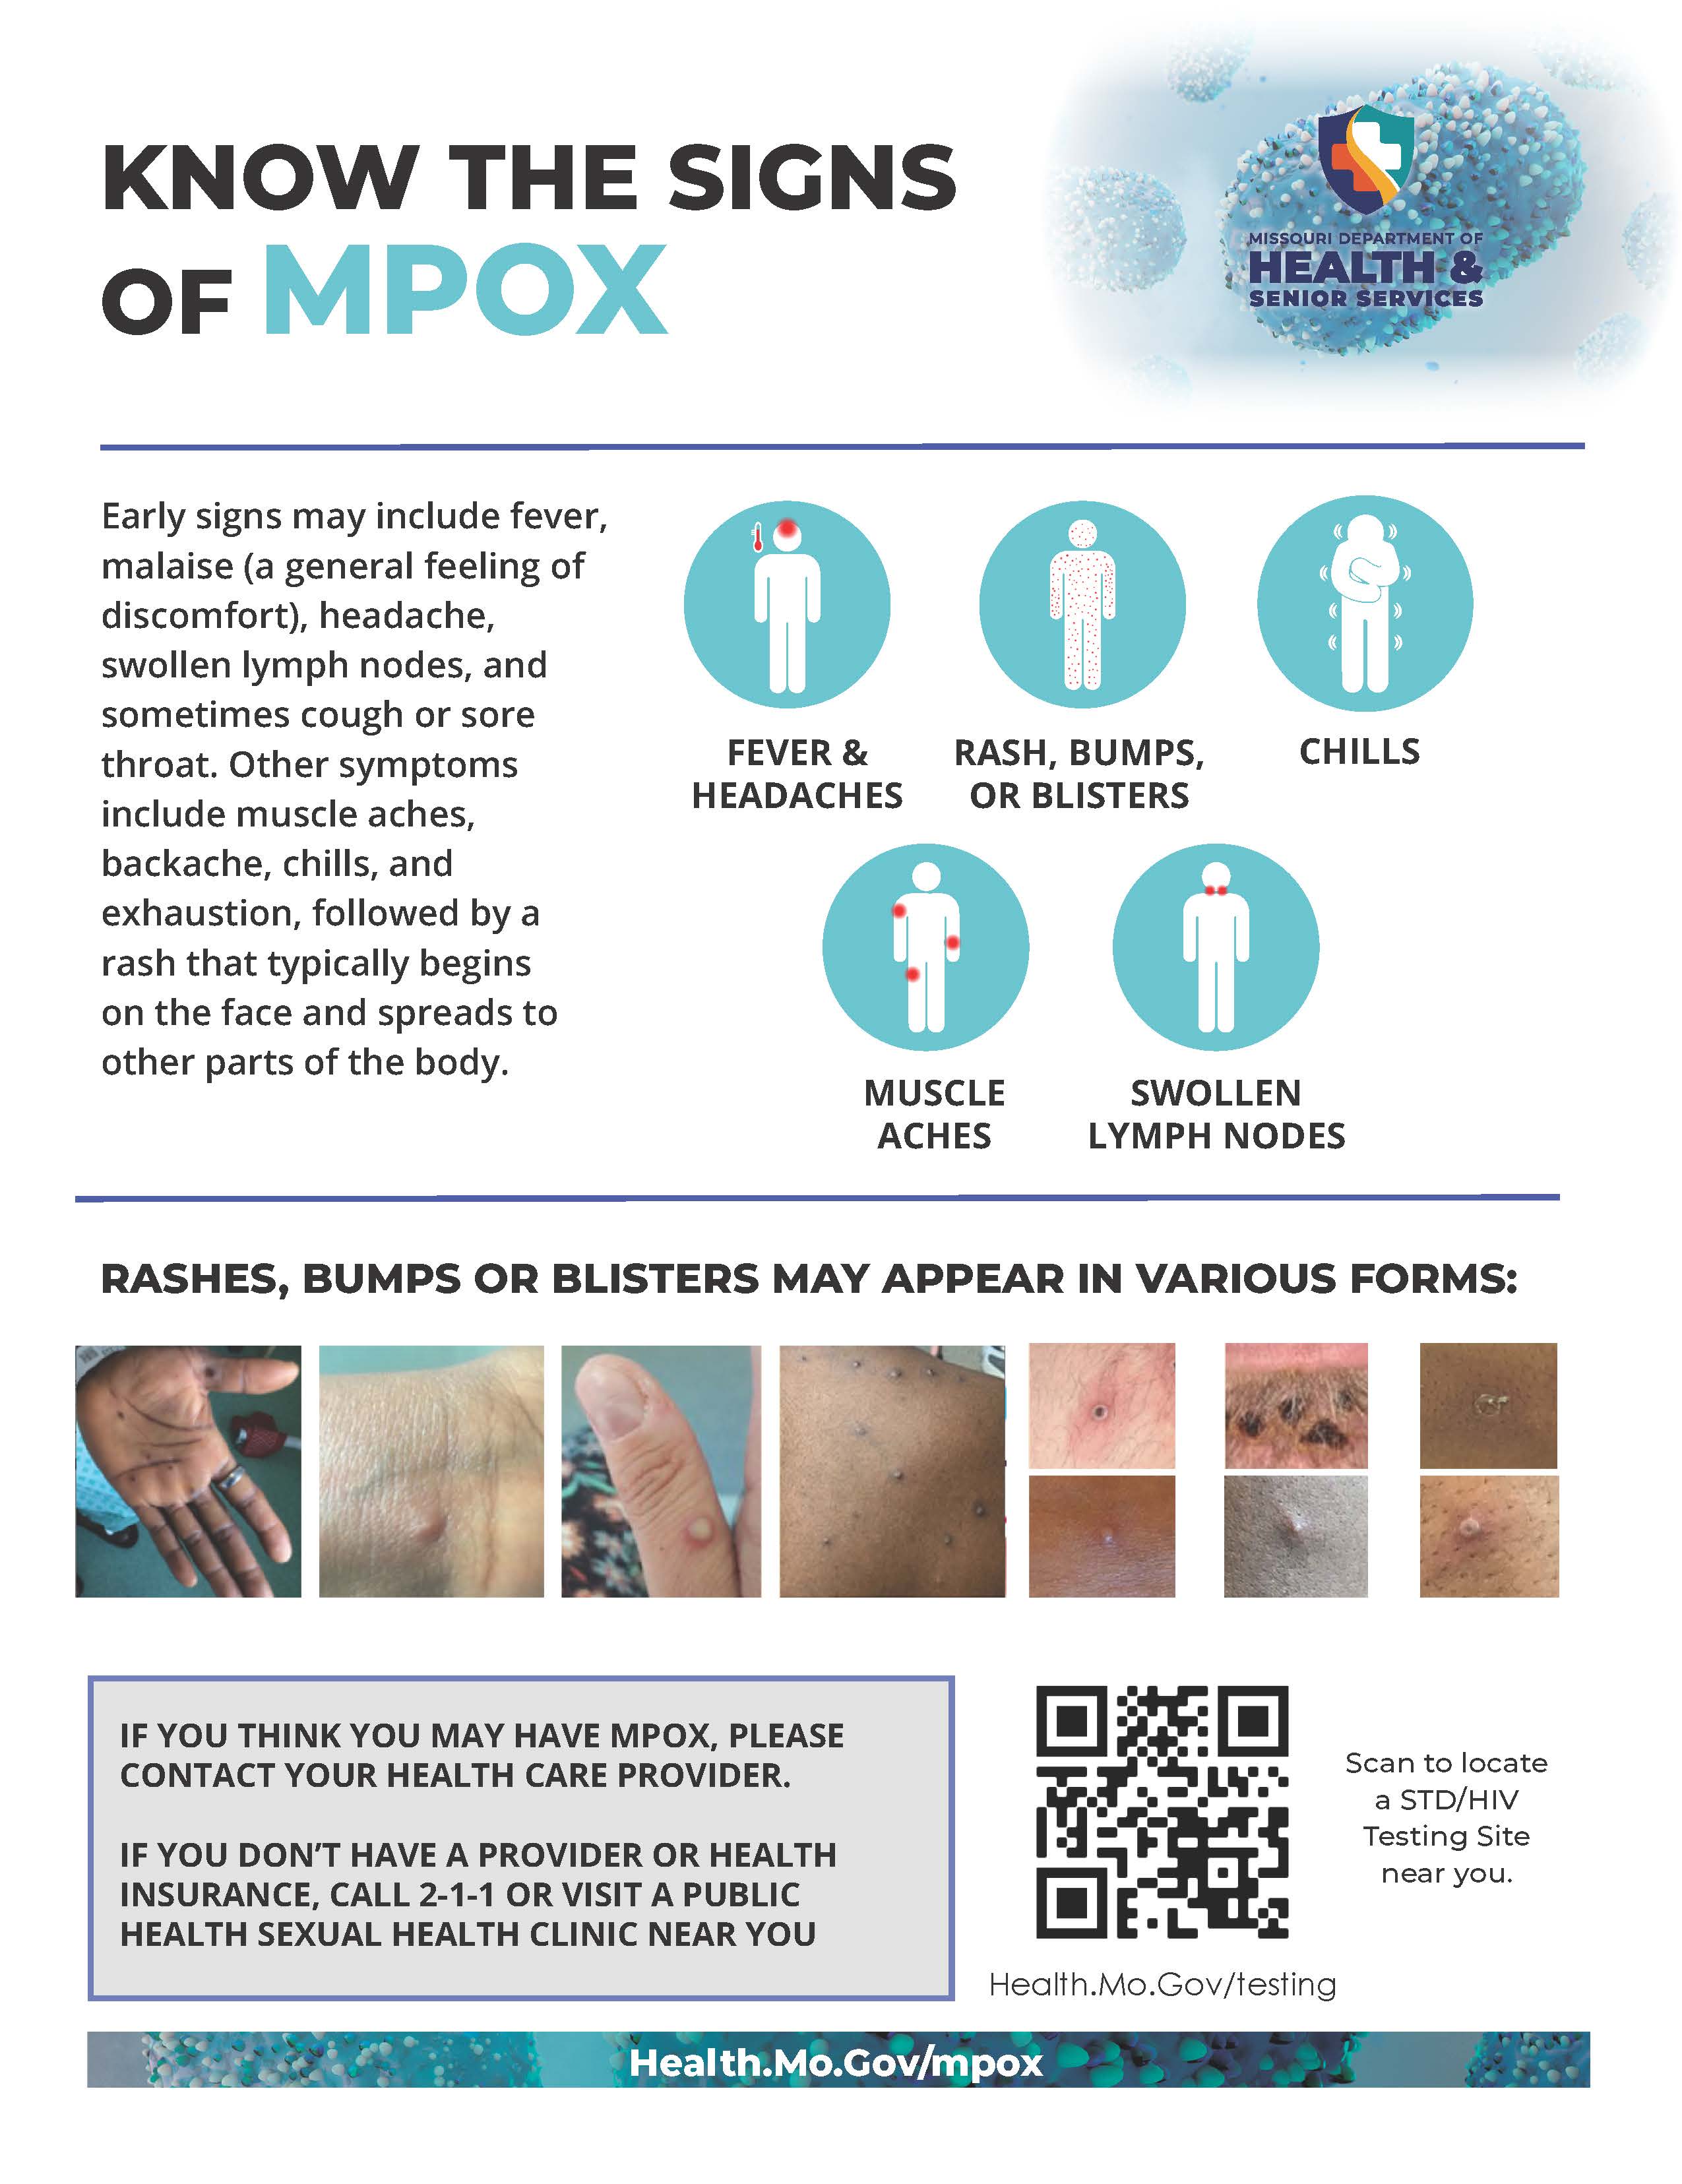 Know the Signs of Monkeypox